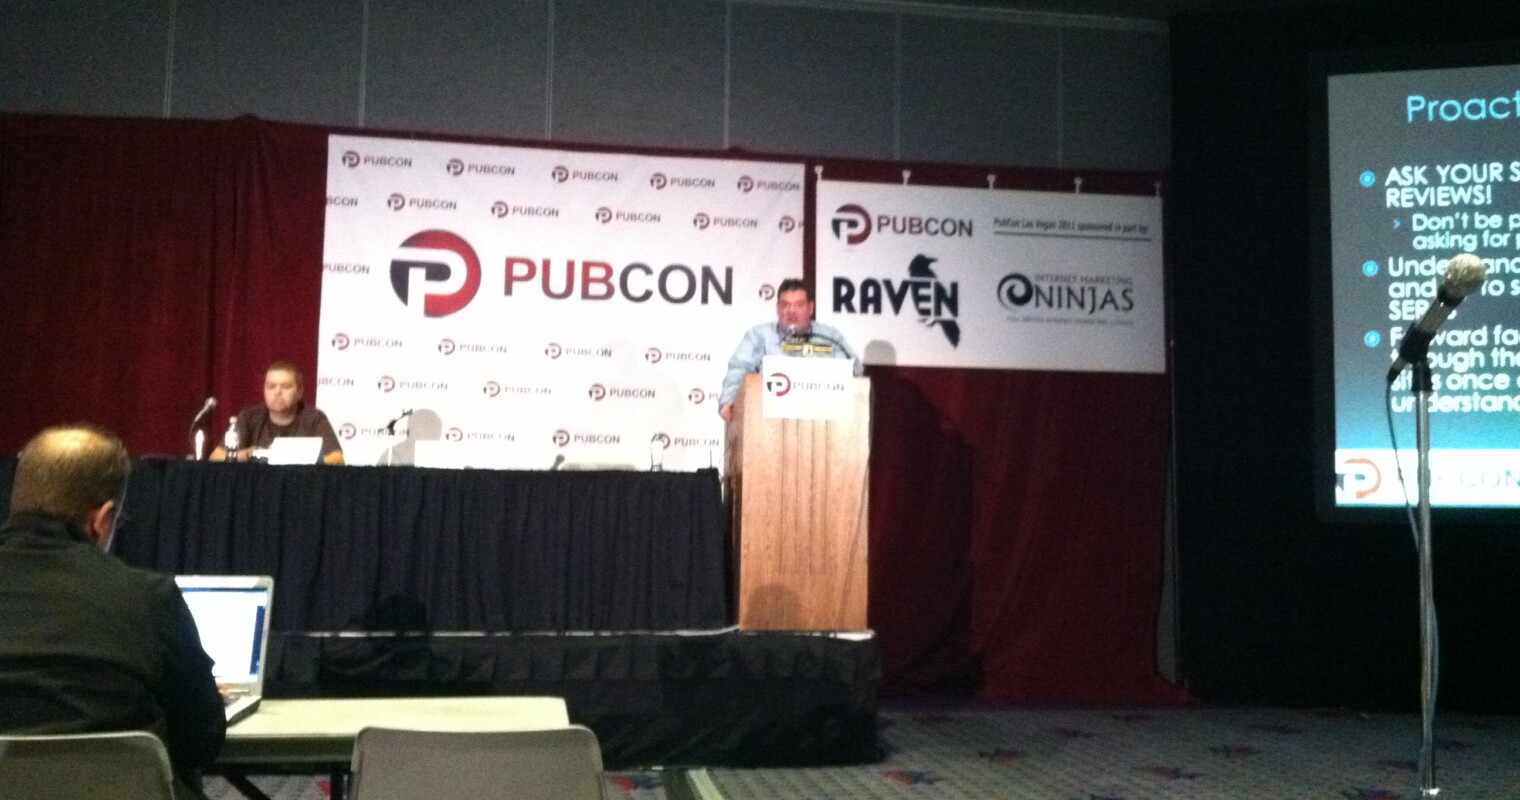 Proactive Reputation Management Strategies with Tony Wright #Pubcon